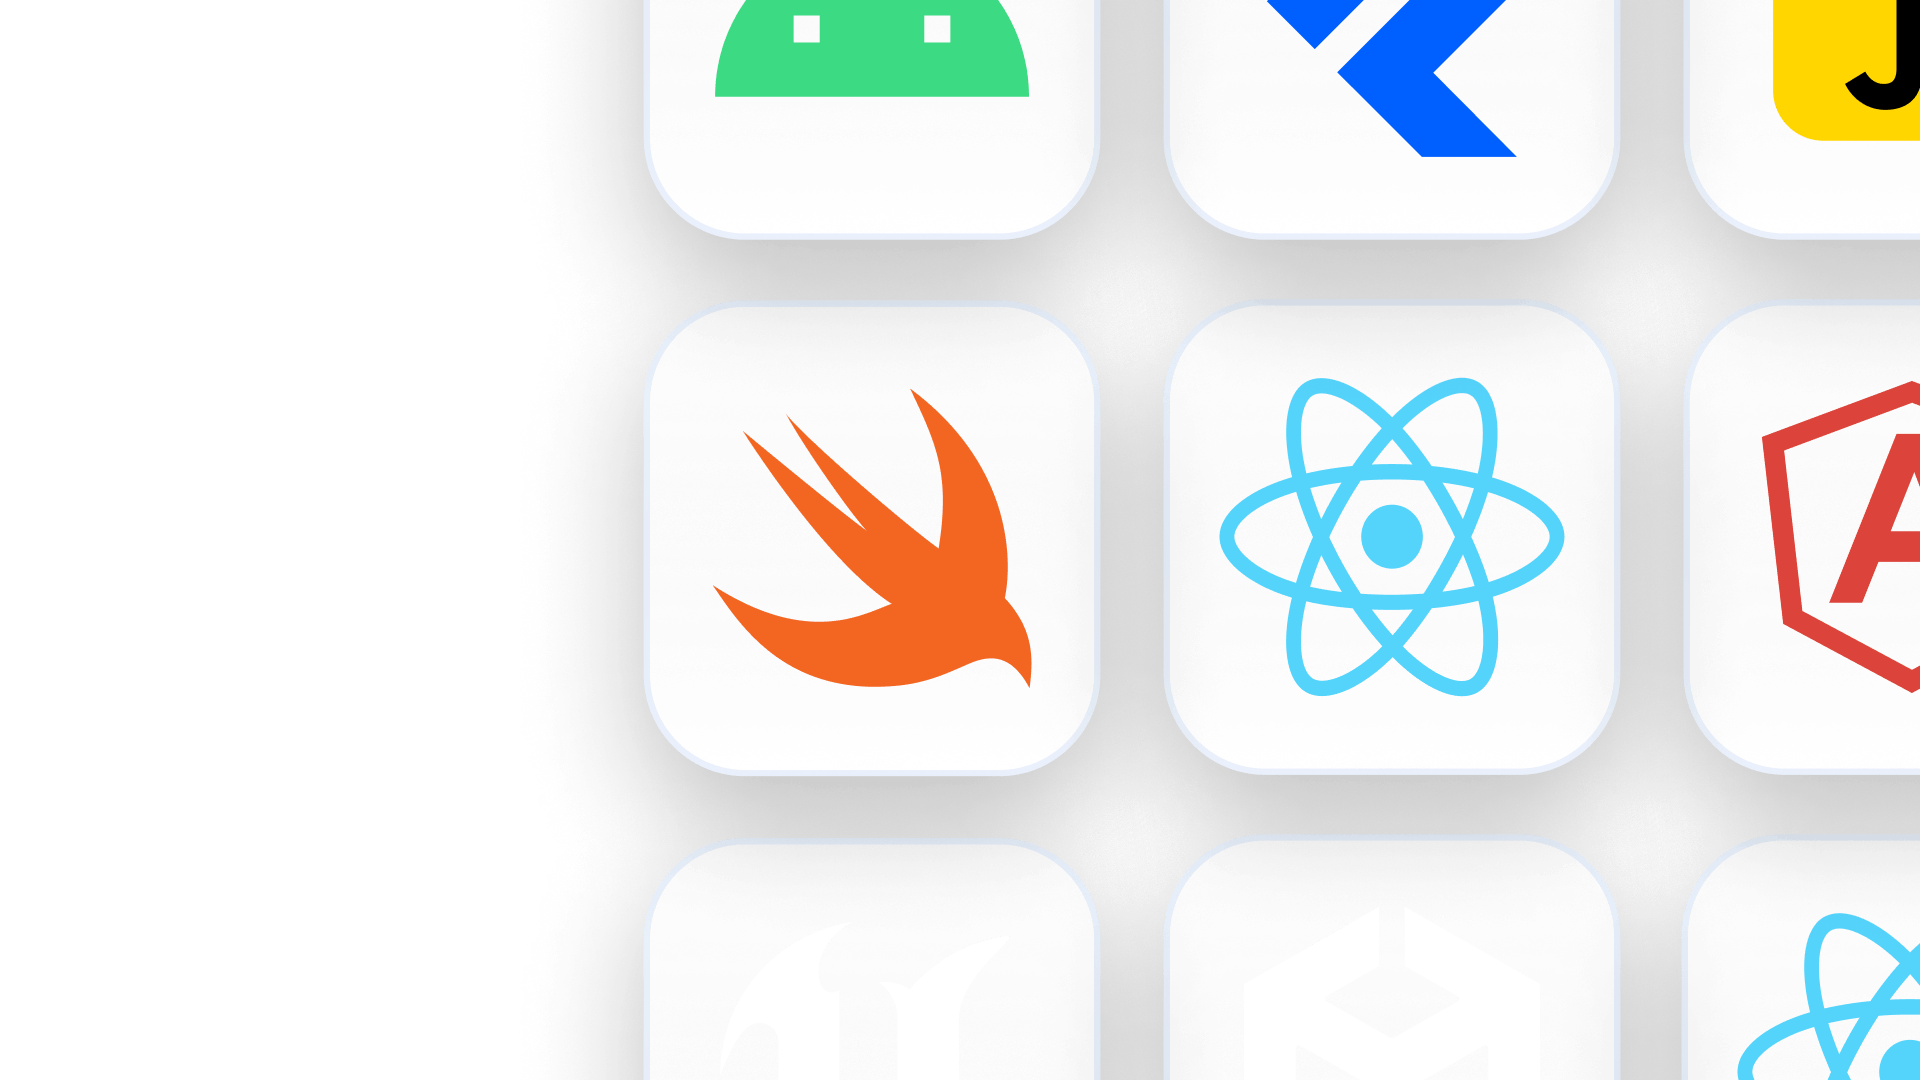 example of react, react native and ios plaform icons